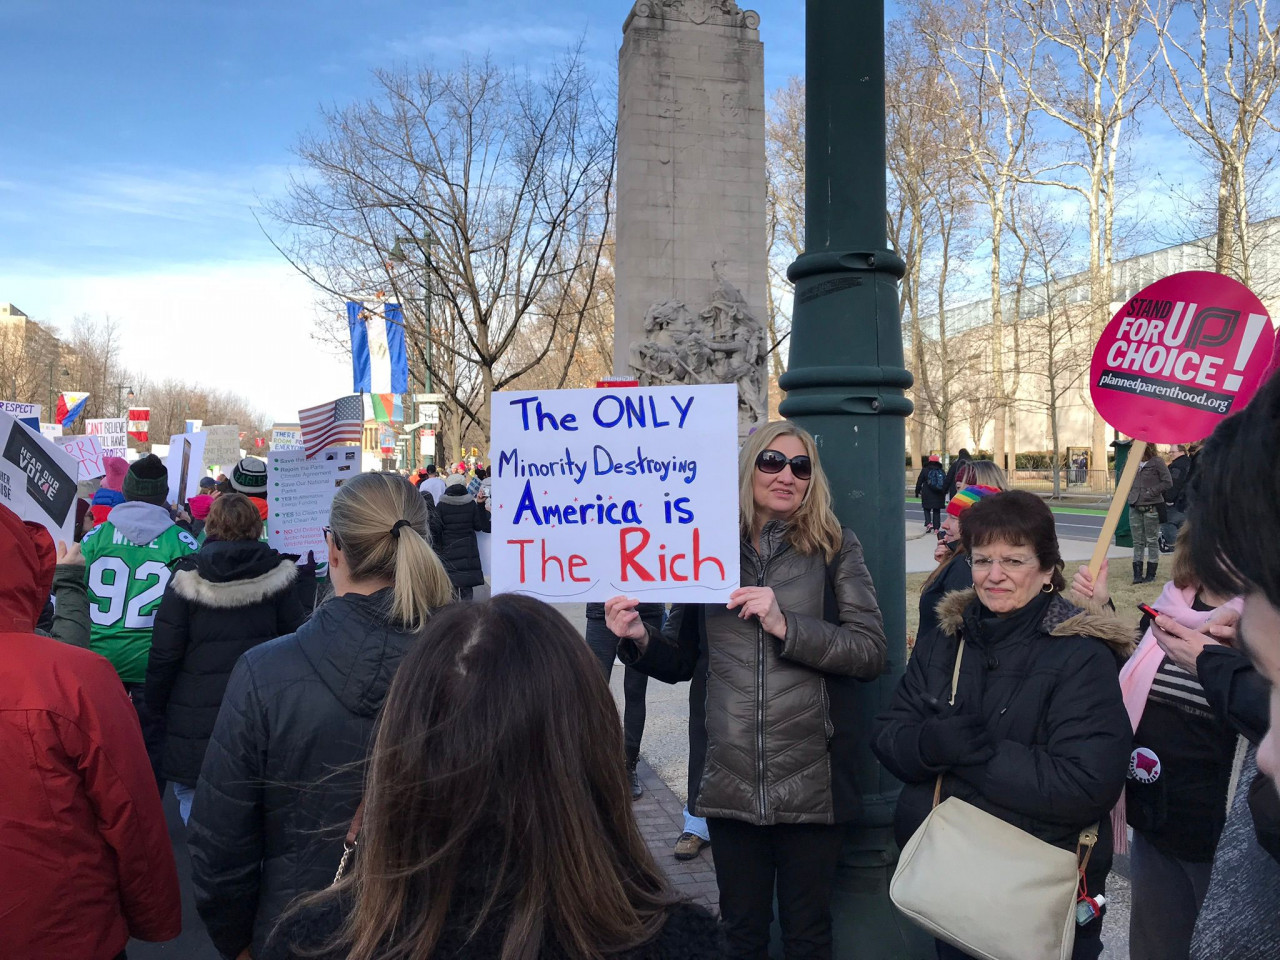 Philly Women's March 2018 - The only <a class="bx-tag" rel="tag" href="https://wethepeople.care/searchKeyword.php?type=keyword&keyword=minority"><s>#</s><b>minority</b></a> destroying America is the rich